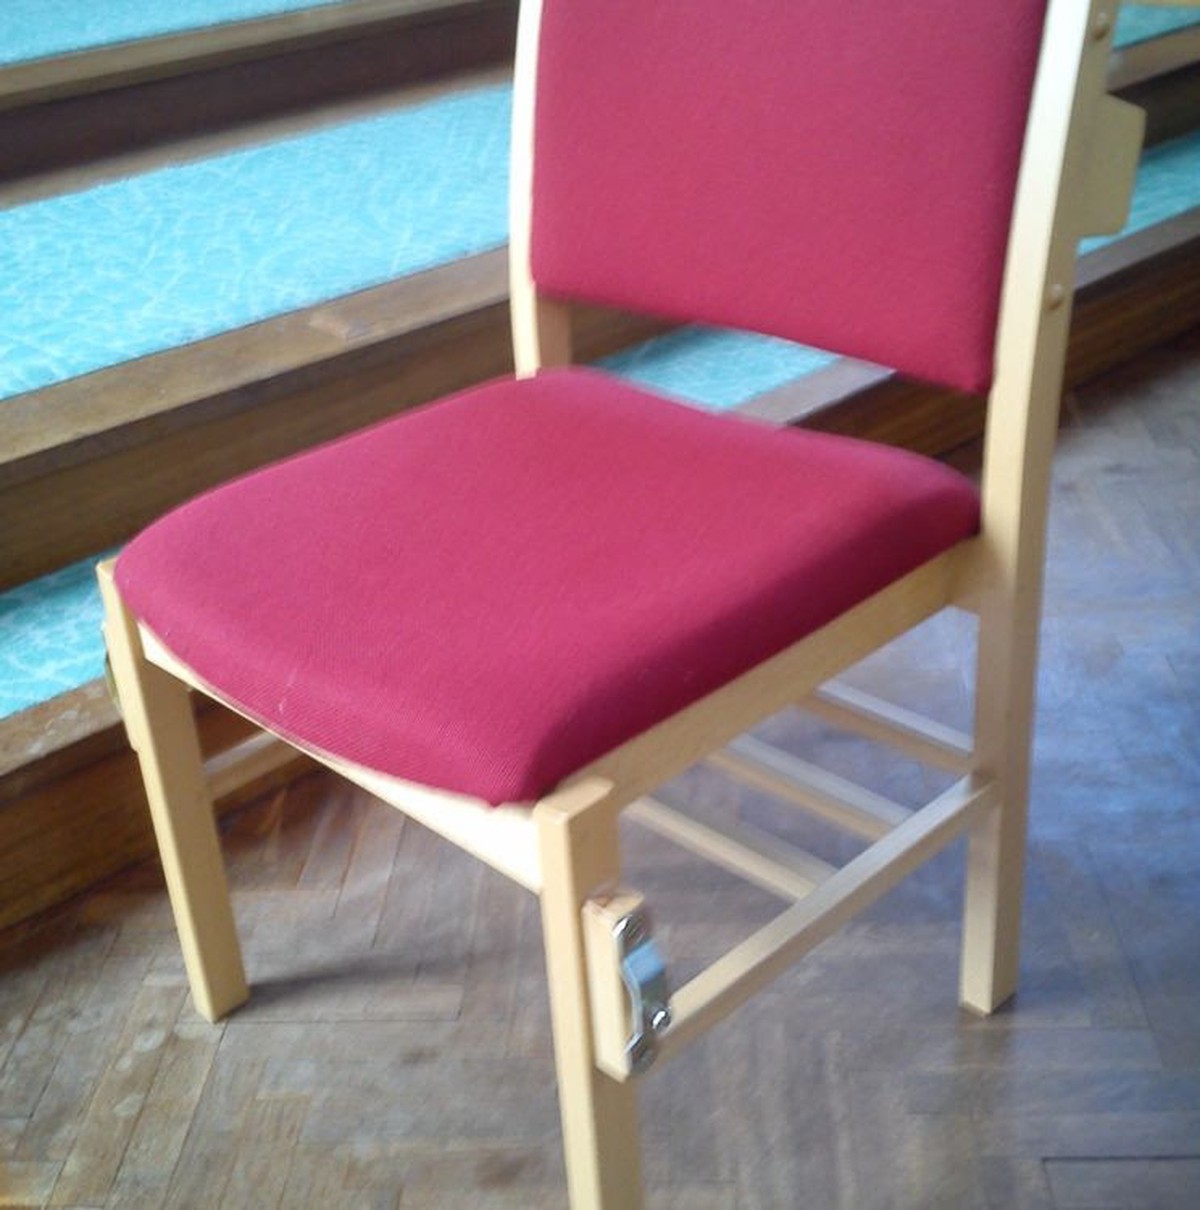 Secondhand Chairs And Tables Church Pews And Chairs 41x